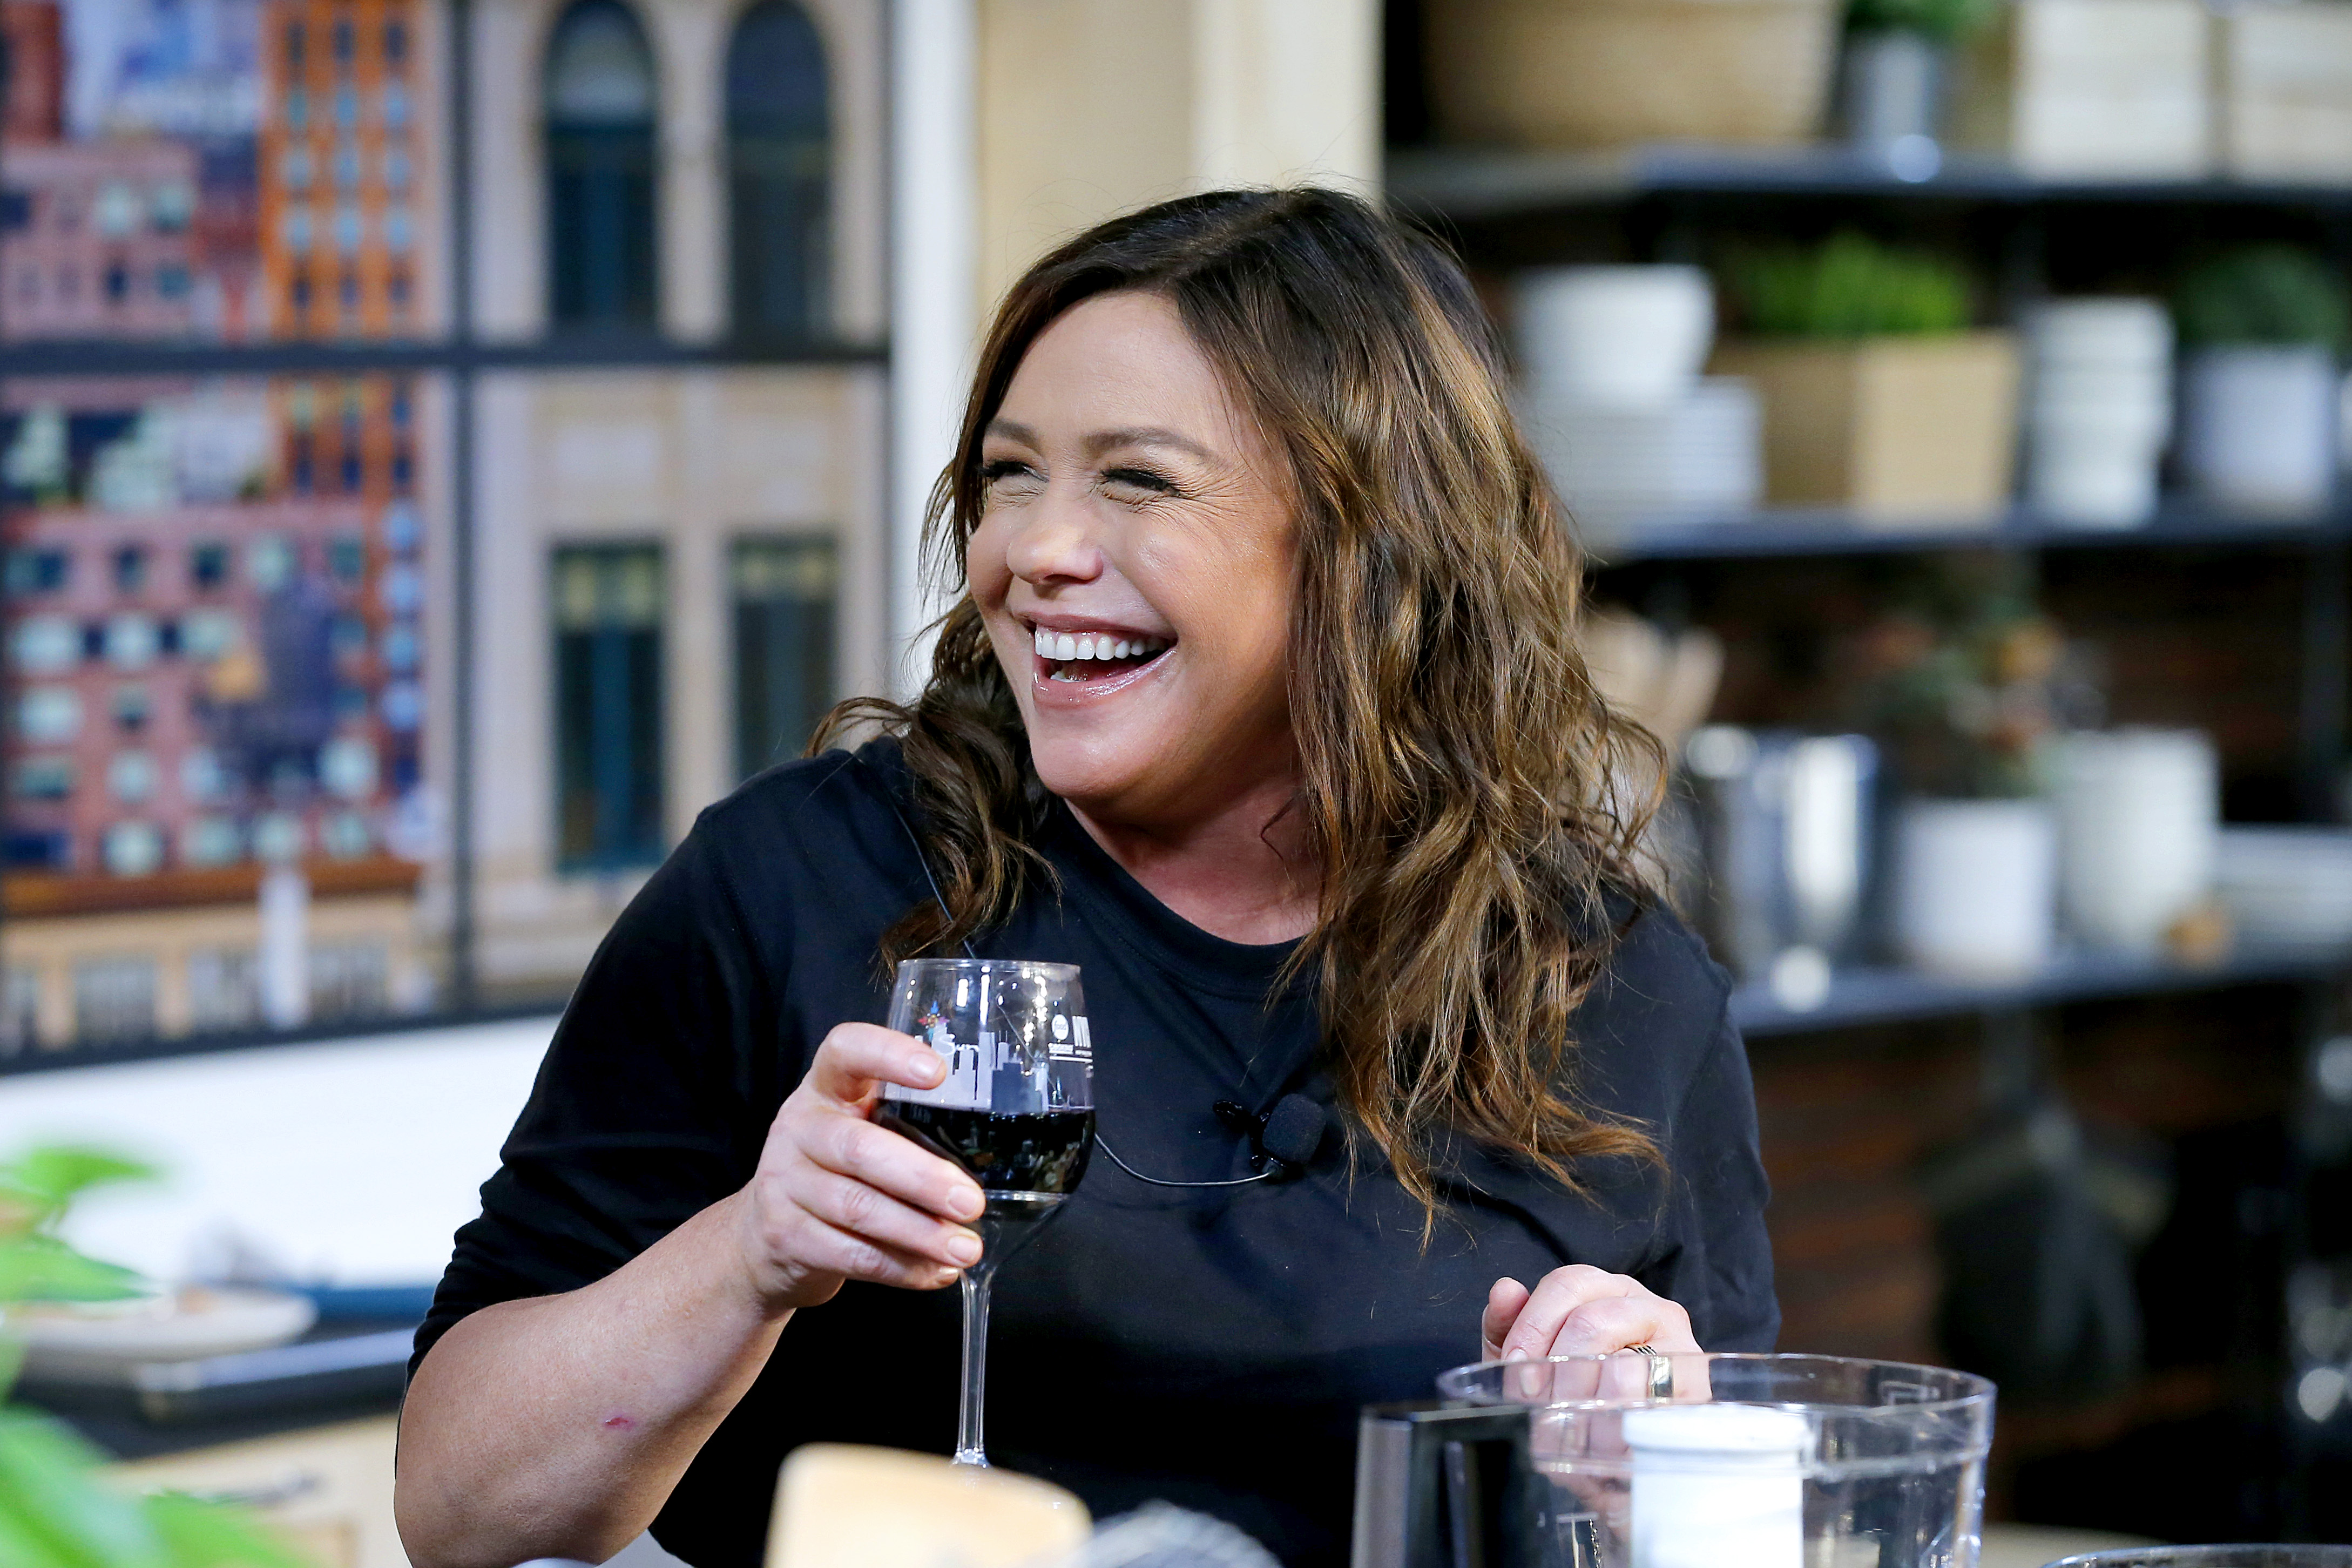 Rachael Ray smiling and holding a glass of wine